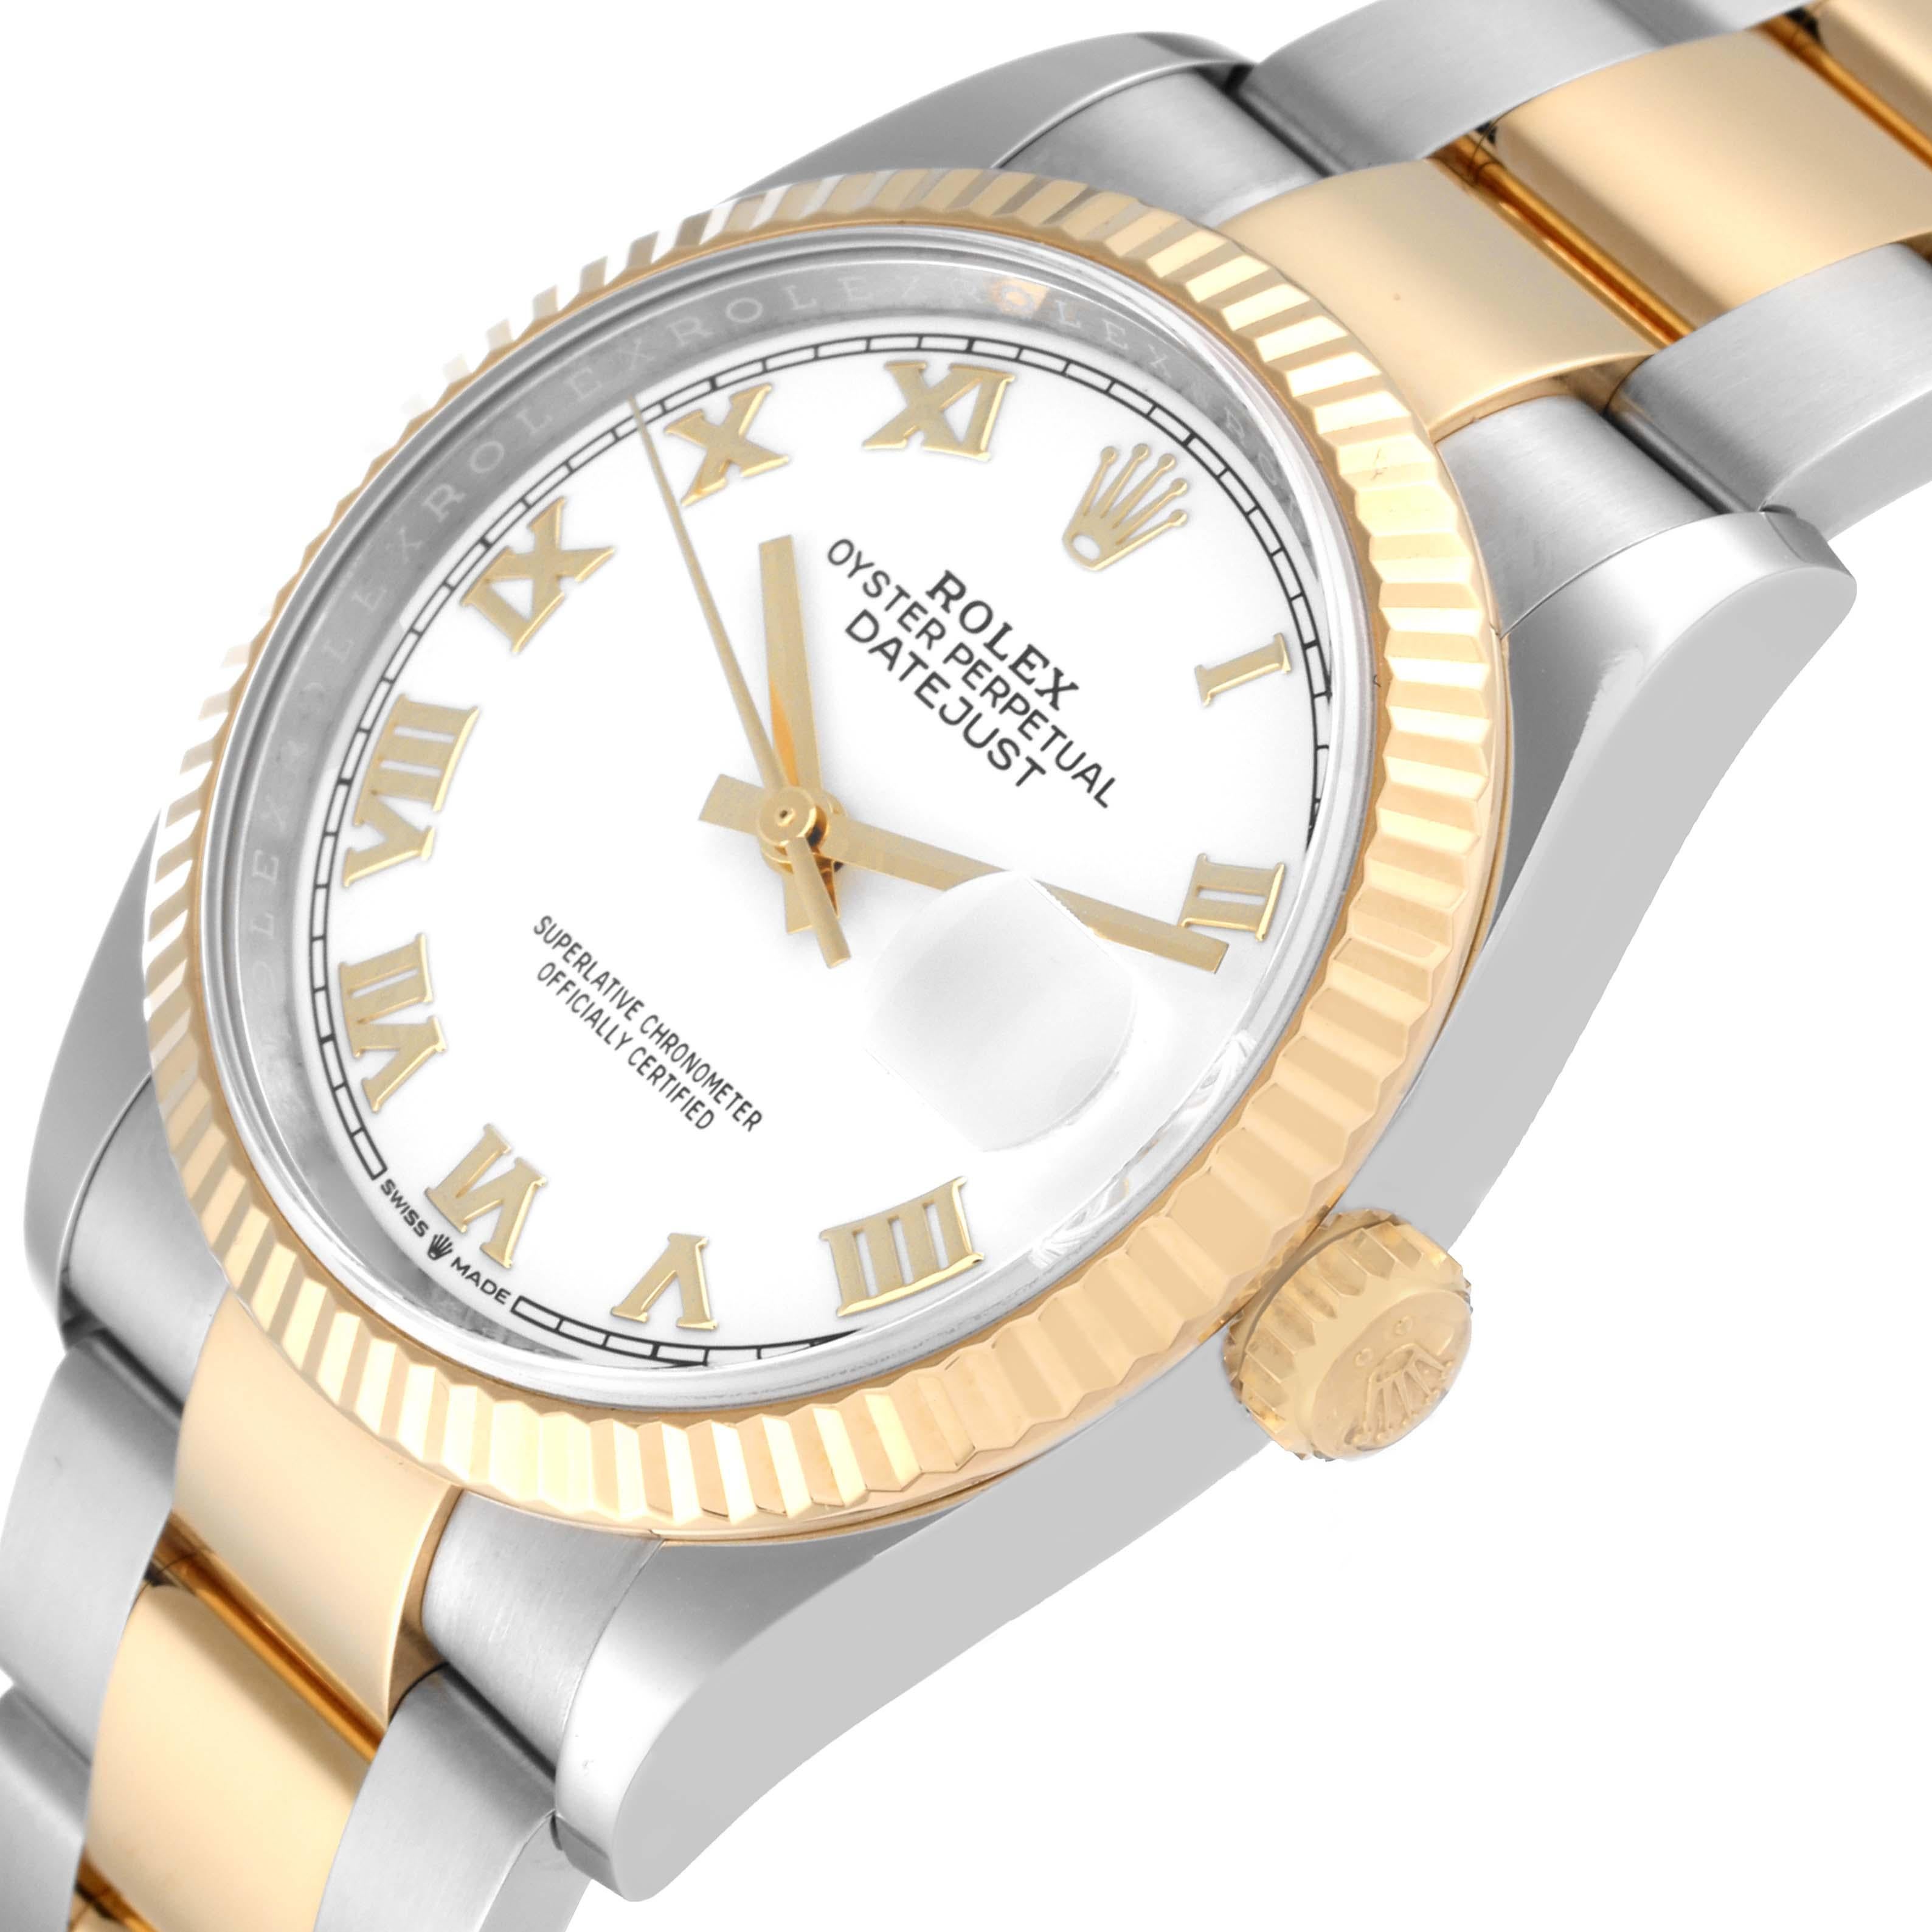 Rolex Datejust Steel Yellow Gold White Dial Mens Watch 126233 Box Card 1